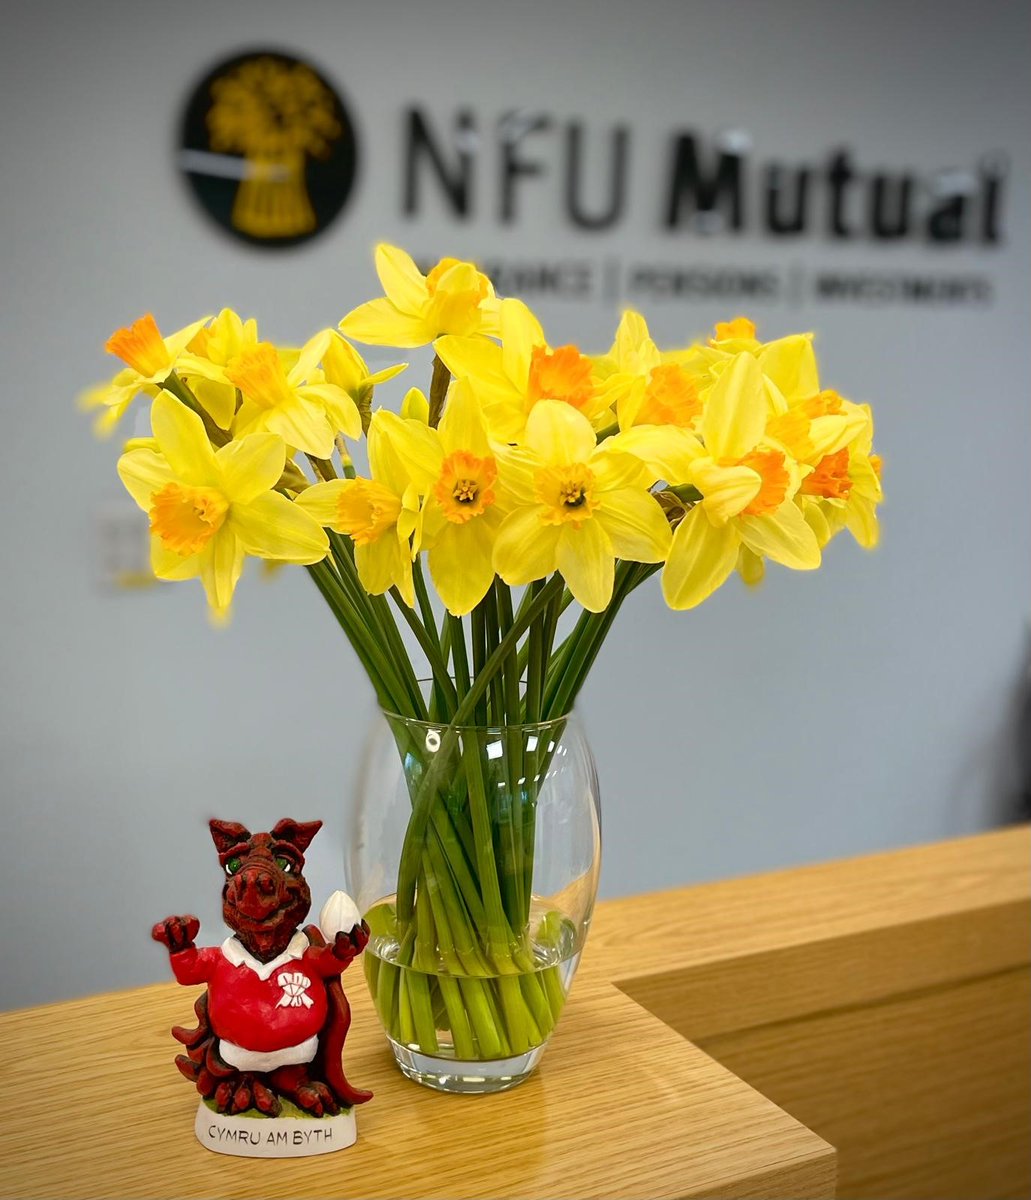 🏴󠁧󠁢󠁷󠁬󠁳󠁿 Dydd Gwyl Dewi Hapus | Happy St David's Day 🏴󠁧󠁢󠁷󠁬󠁳󠁿 May your day be as bright and beautiful as a field of daffodils!